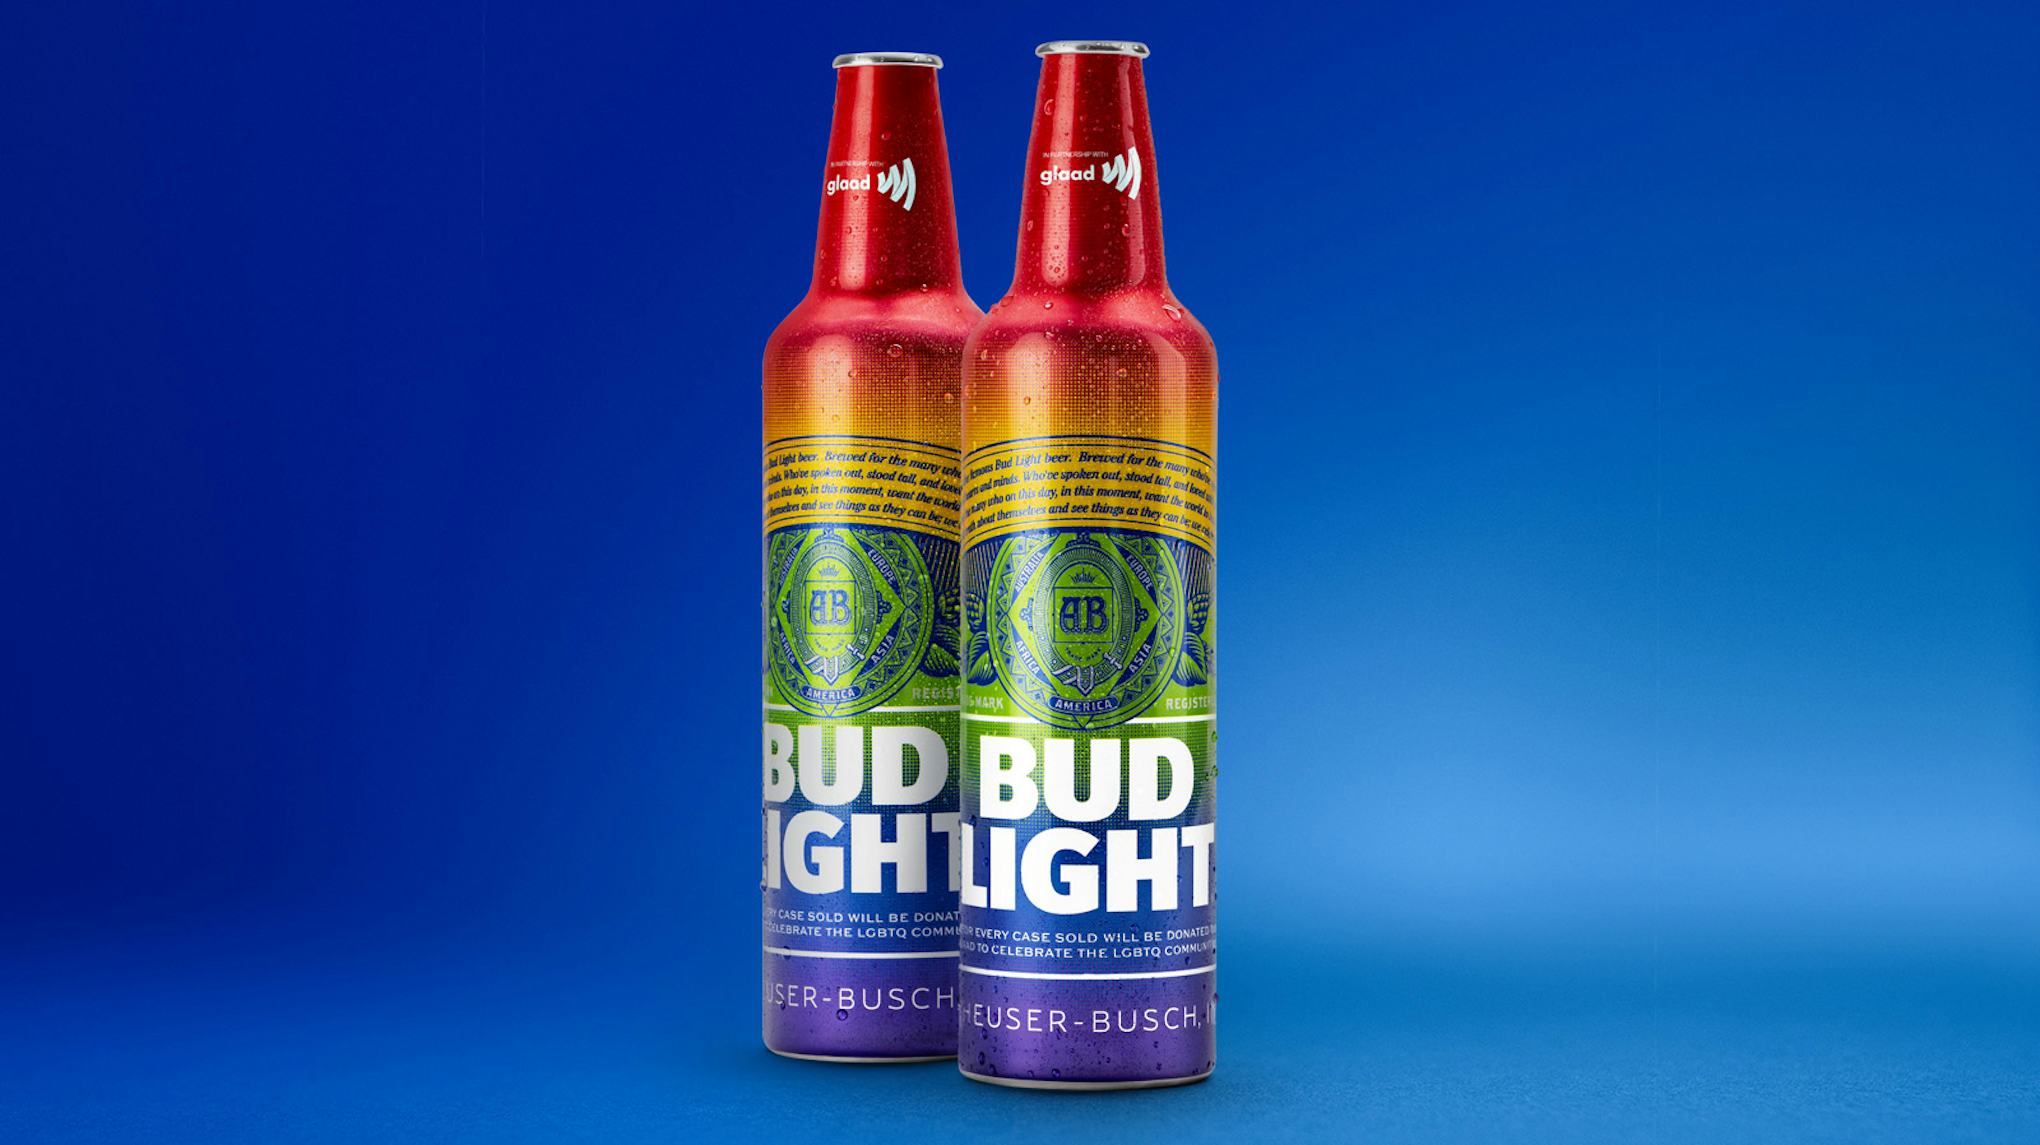 Here's Where To Get Rainbow Bud Light GLAAD Bottles To Show Your Pride